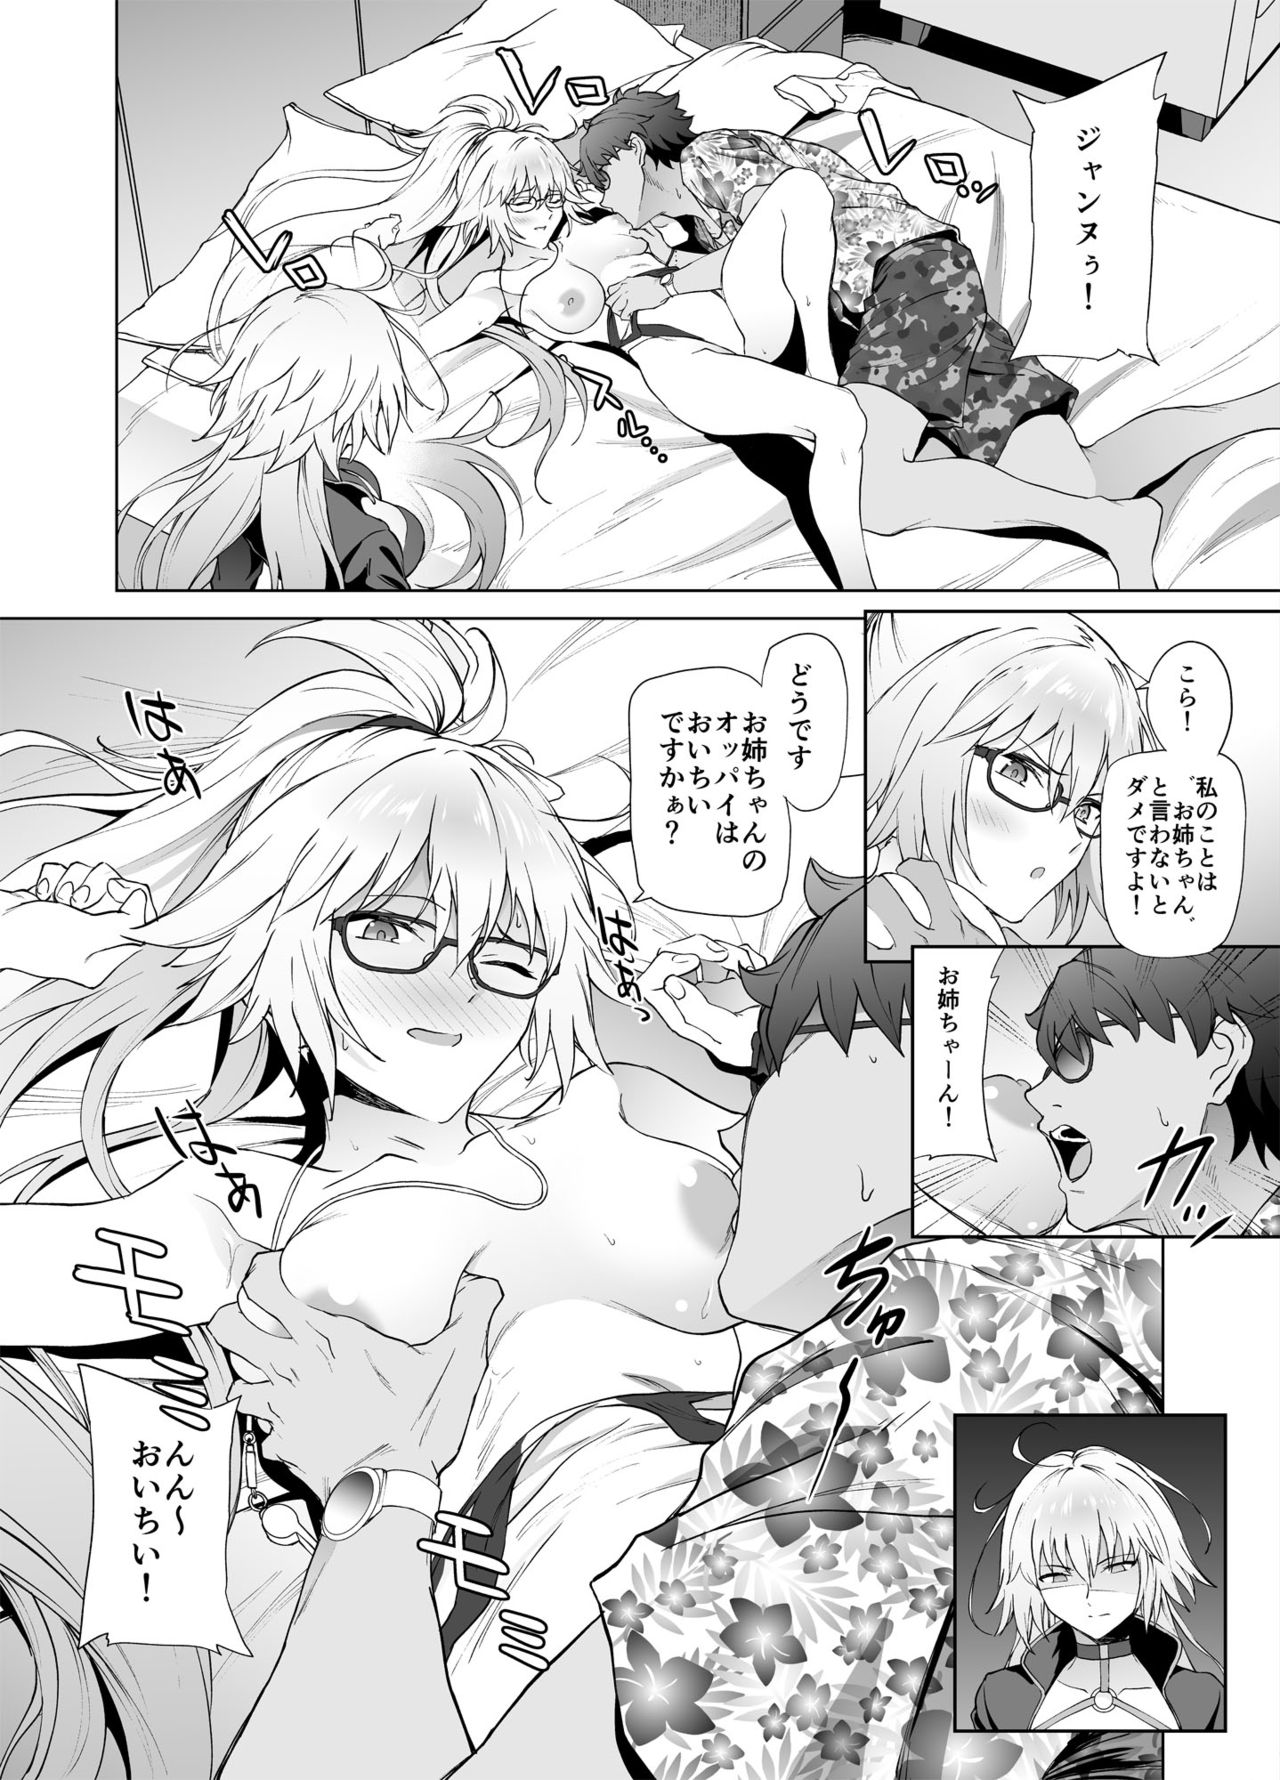 [EXTENDED PART (Endo Yoshiki)] Jeanne W (Fate/Grand Order) [Digital] page 9 full